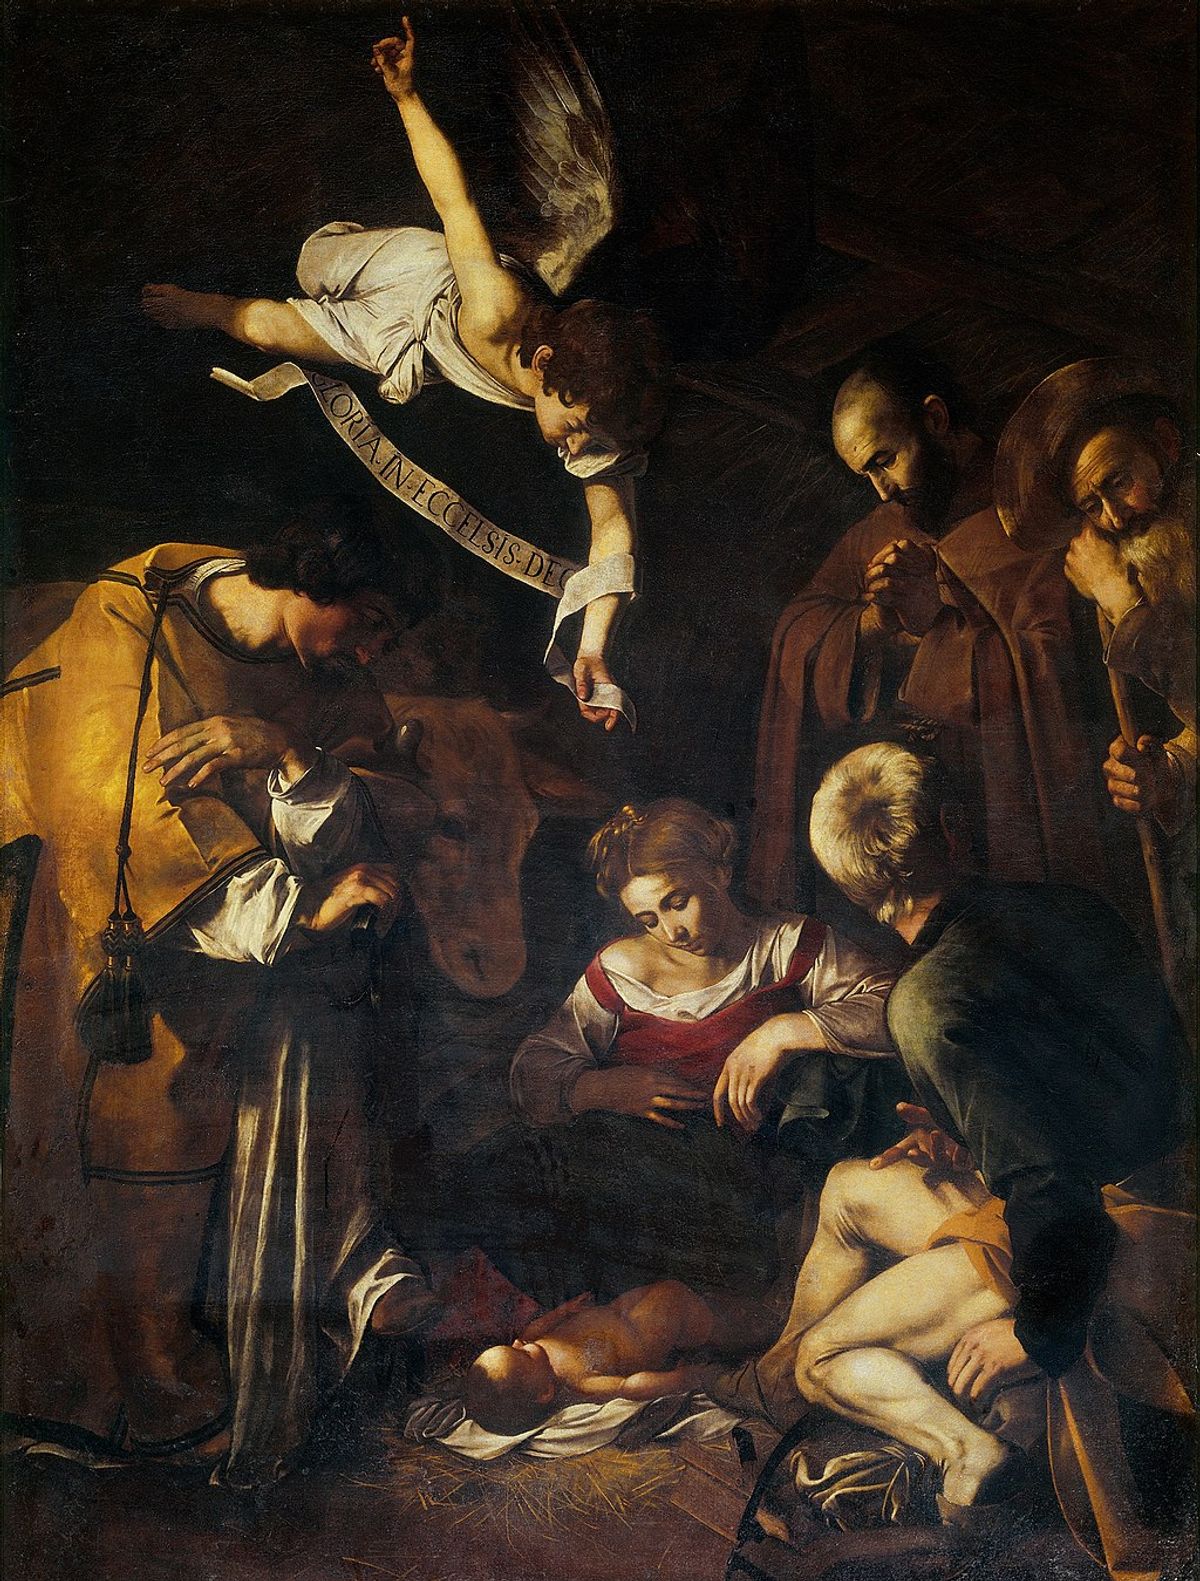 Caravaggio, Nativity with St. Francis and St. Lawrence (1609)

public domain / Wikimedia 